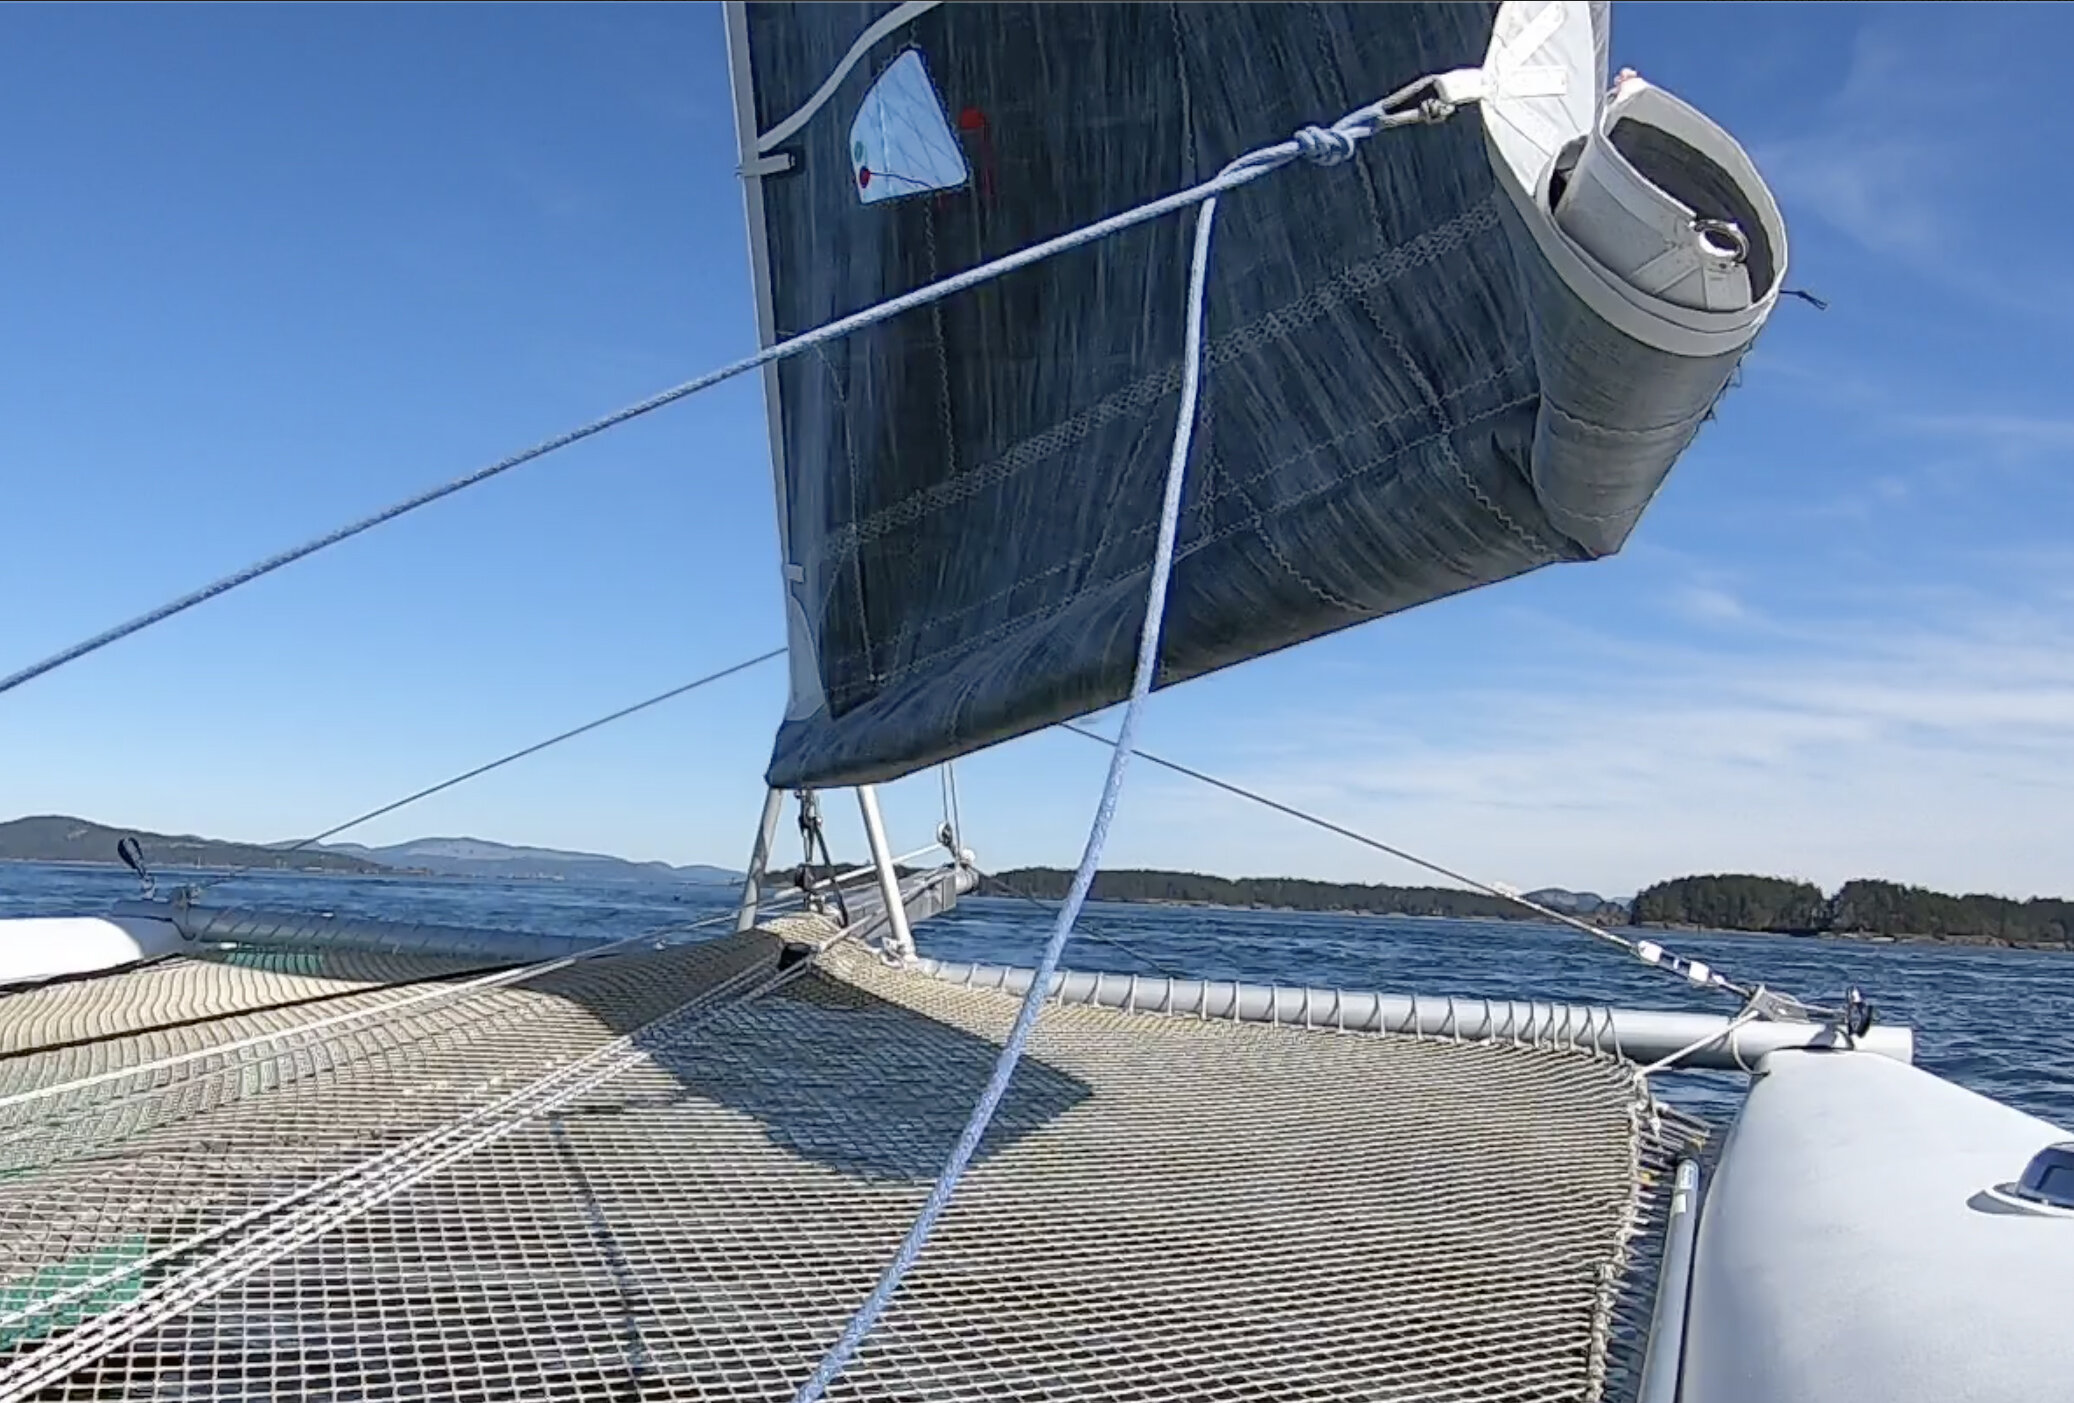 One of the advantages of having a hanked-on jib is the ability to reef it and end up with a well shaped sail. An optional zipper system allows the reefed lower part of the sail to be rolled and then zipped up neatly as show above.